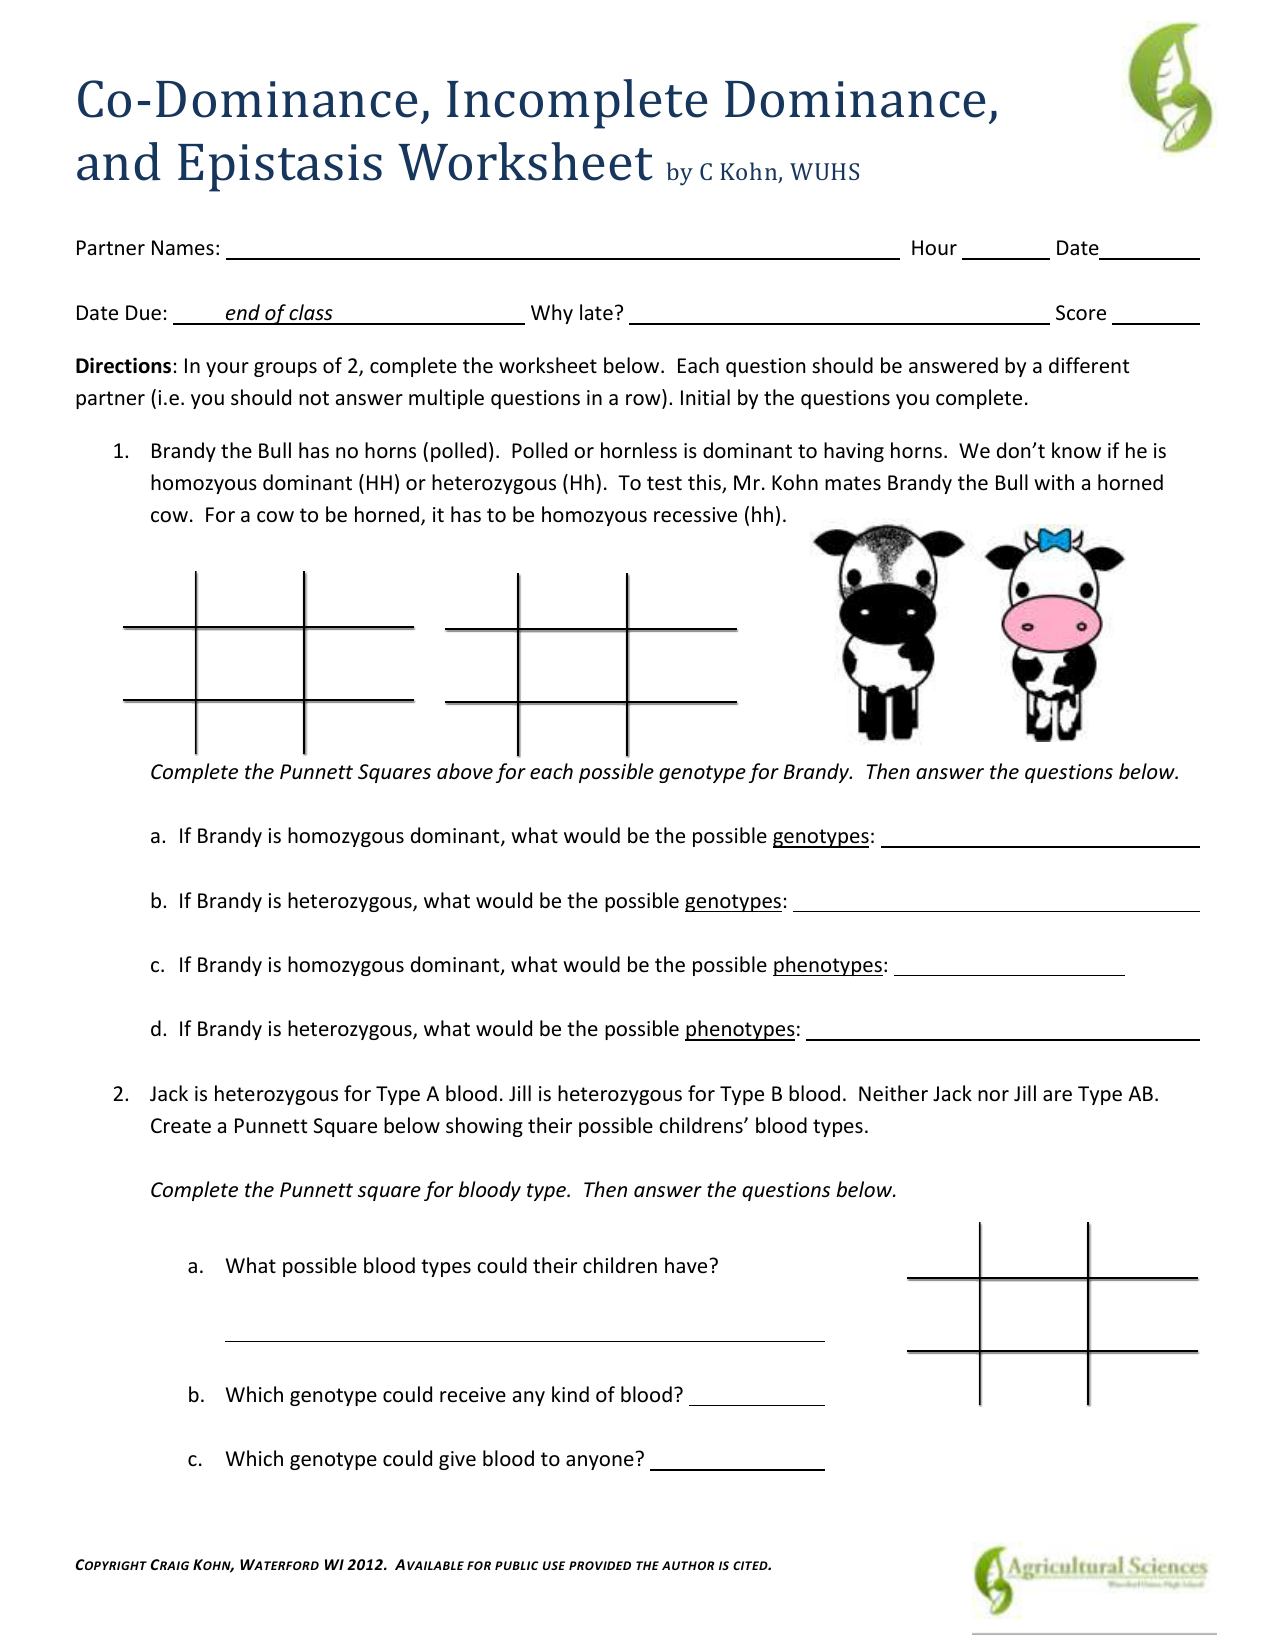 Co-Dom, Inc. Dom, and Epistasis Worksheet Within Codominance Worksheet Blood Types